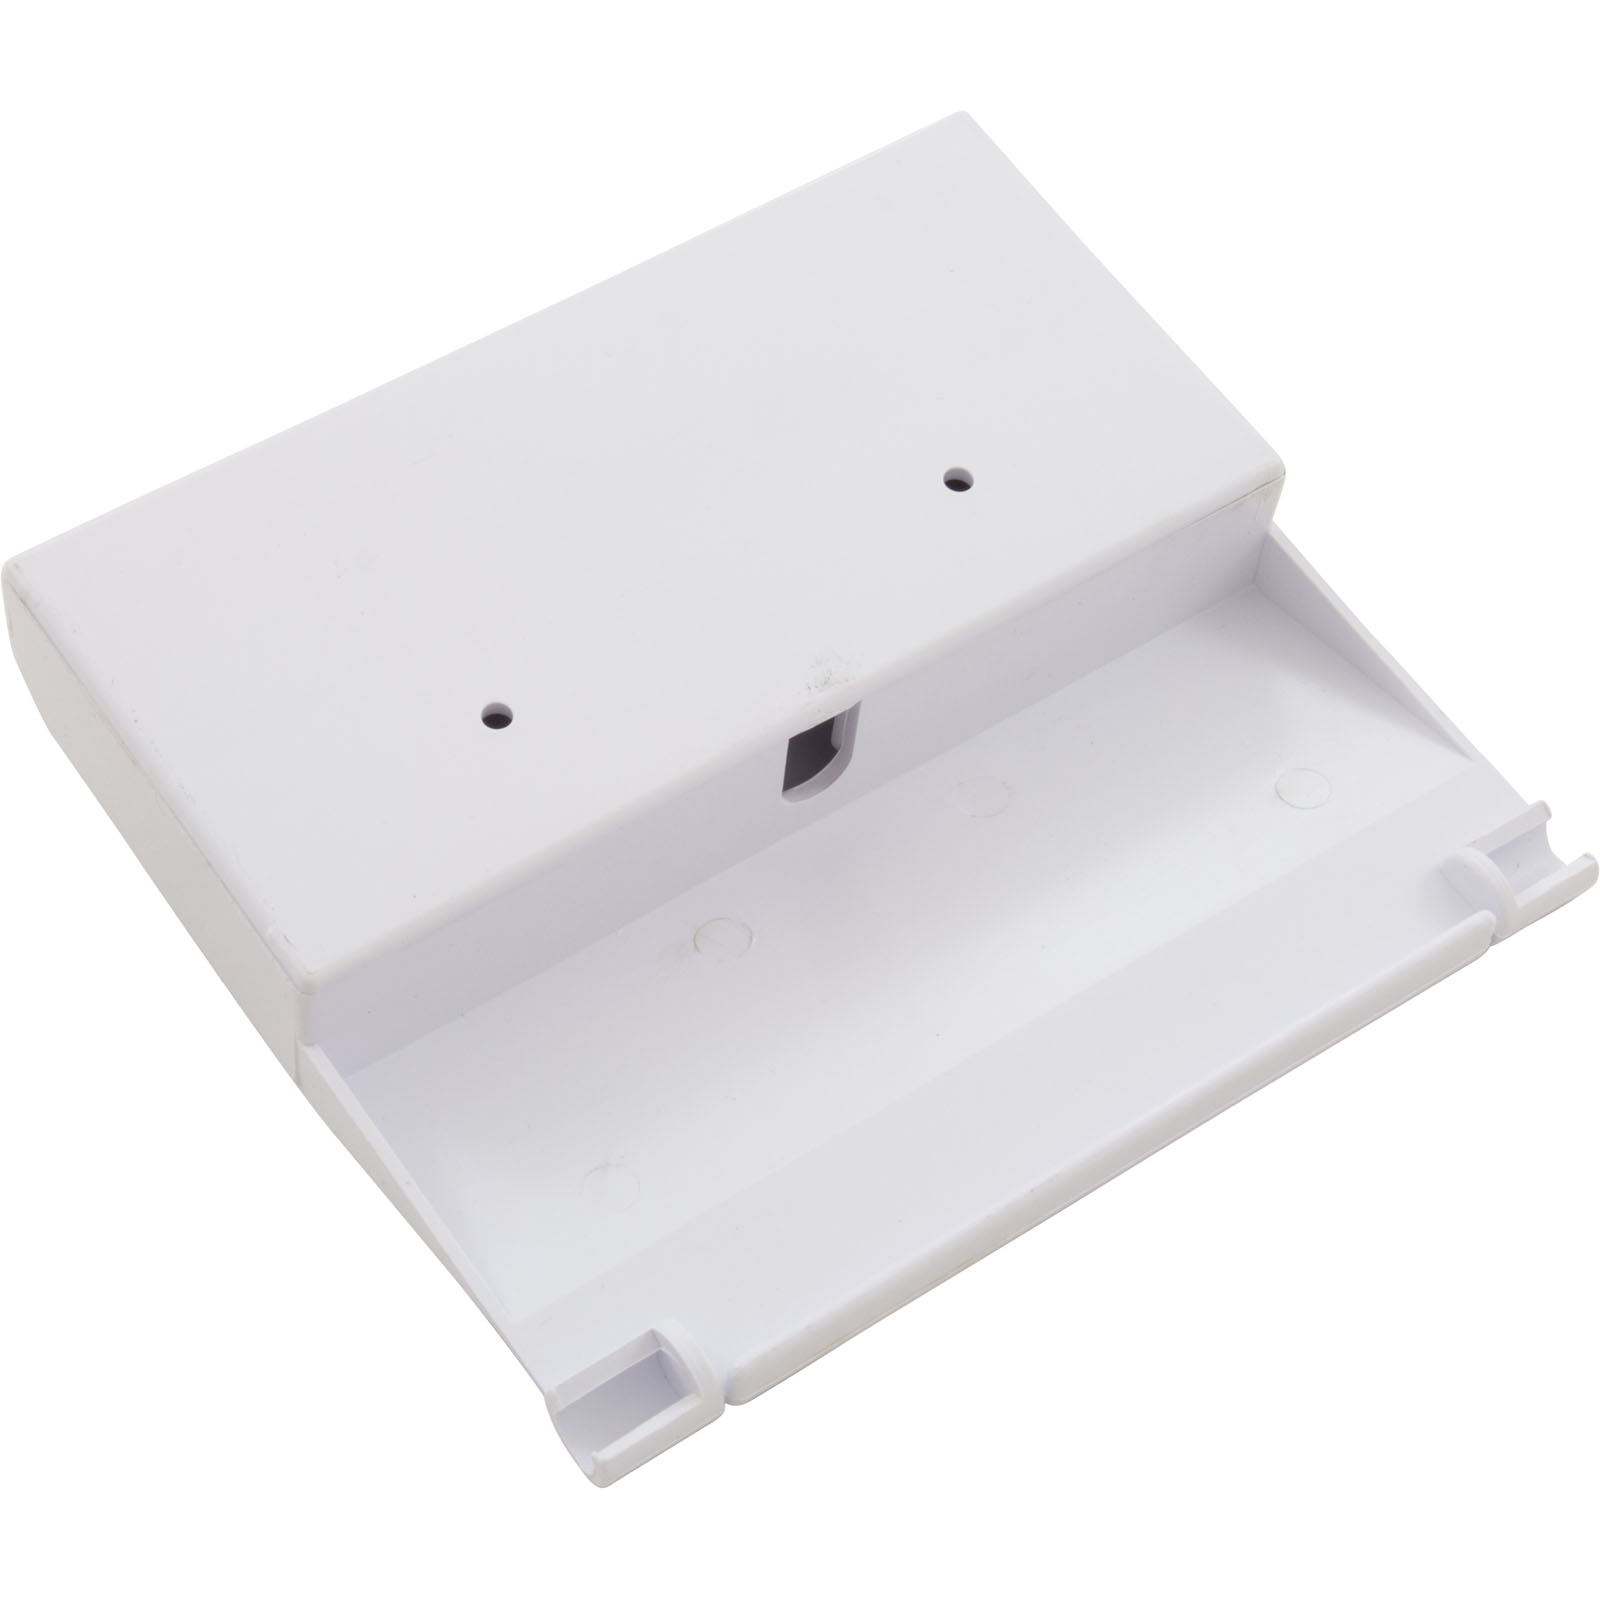 Picture of Front Access Skimmer Weir Door, White